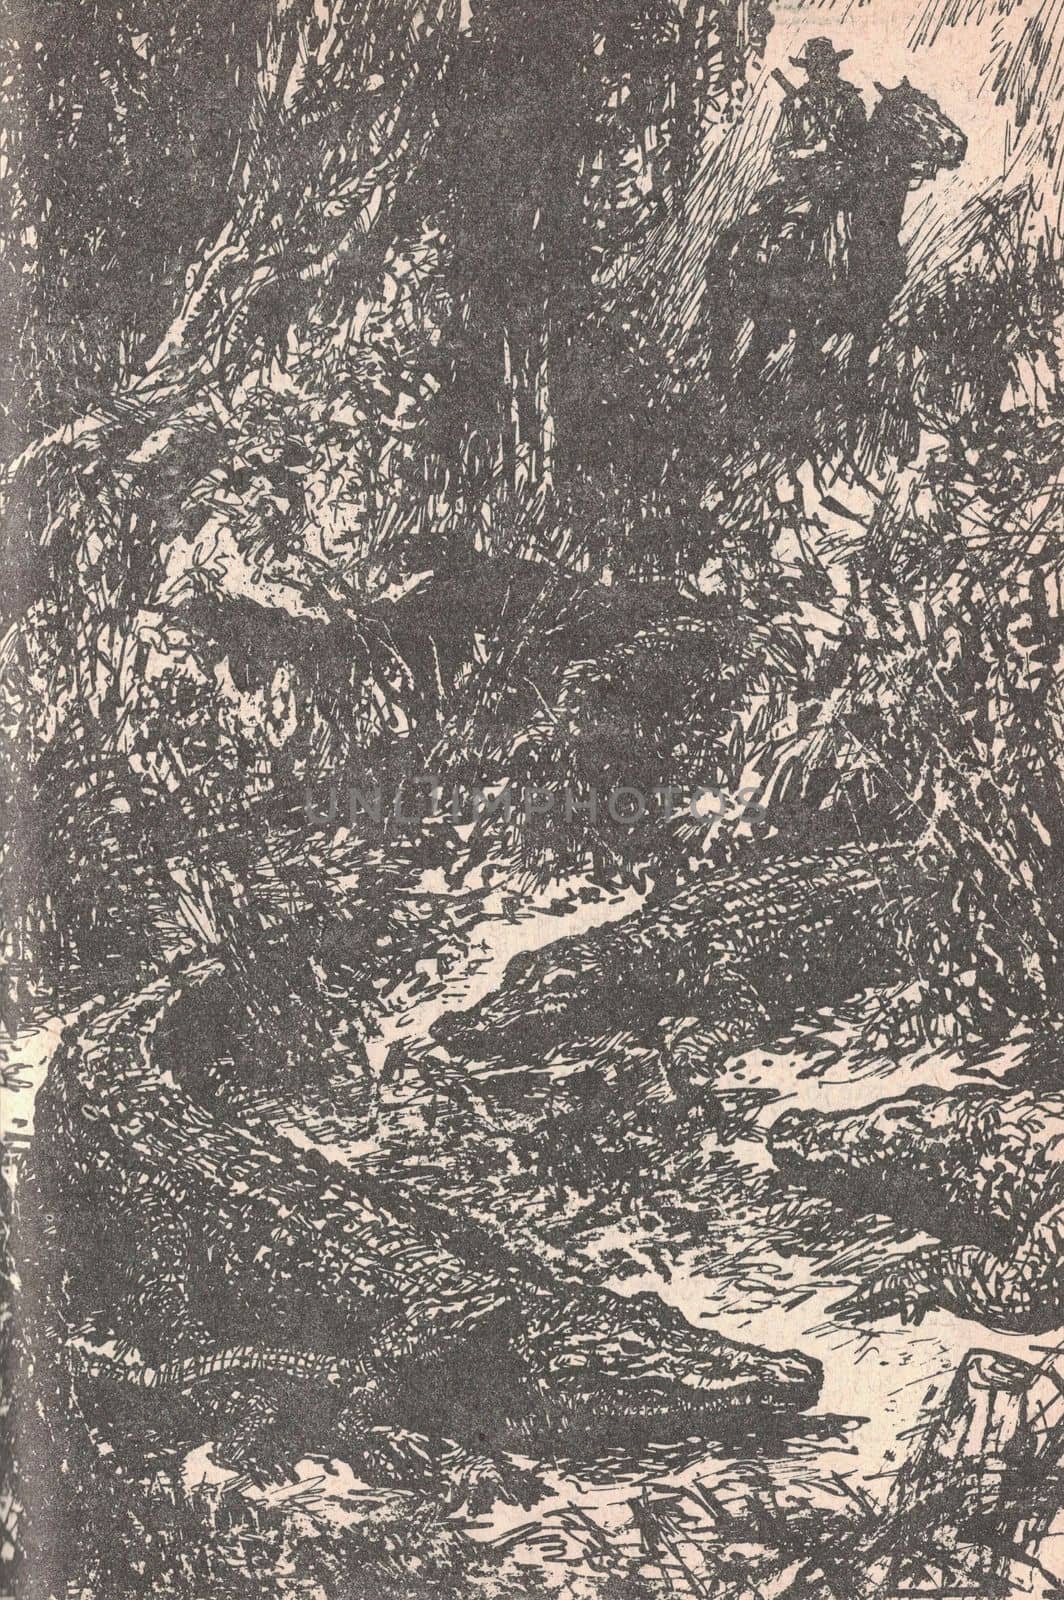 Black and white illustration shows a man on horseback in a jungle full of crocodiles. Drawing shows a South American rainforest. Vintage black and white picture shows adventure life in the previous century. Life in the 19th century.